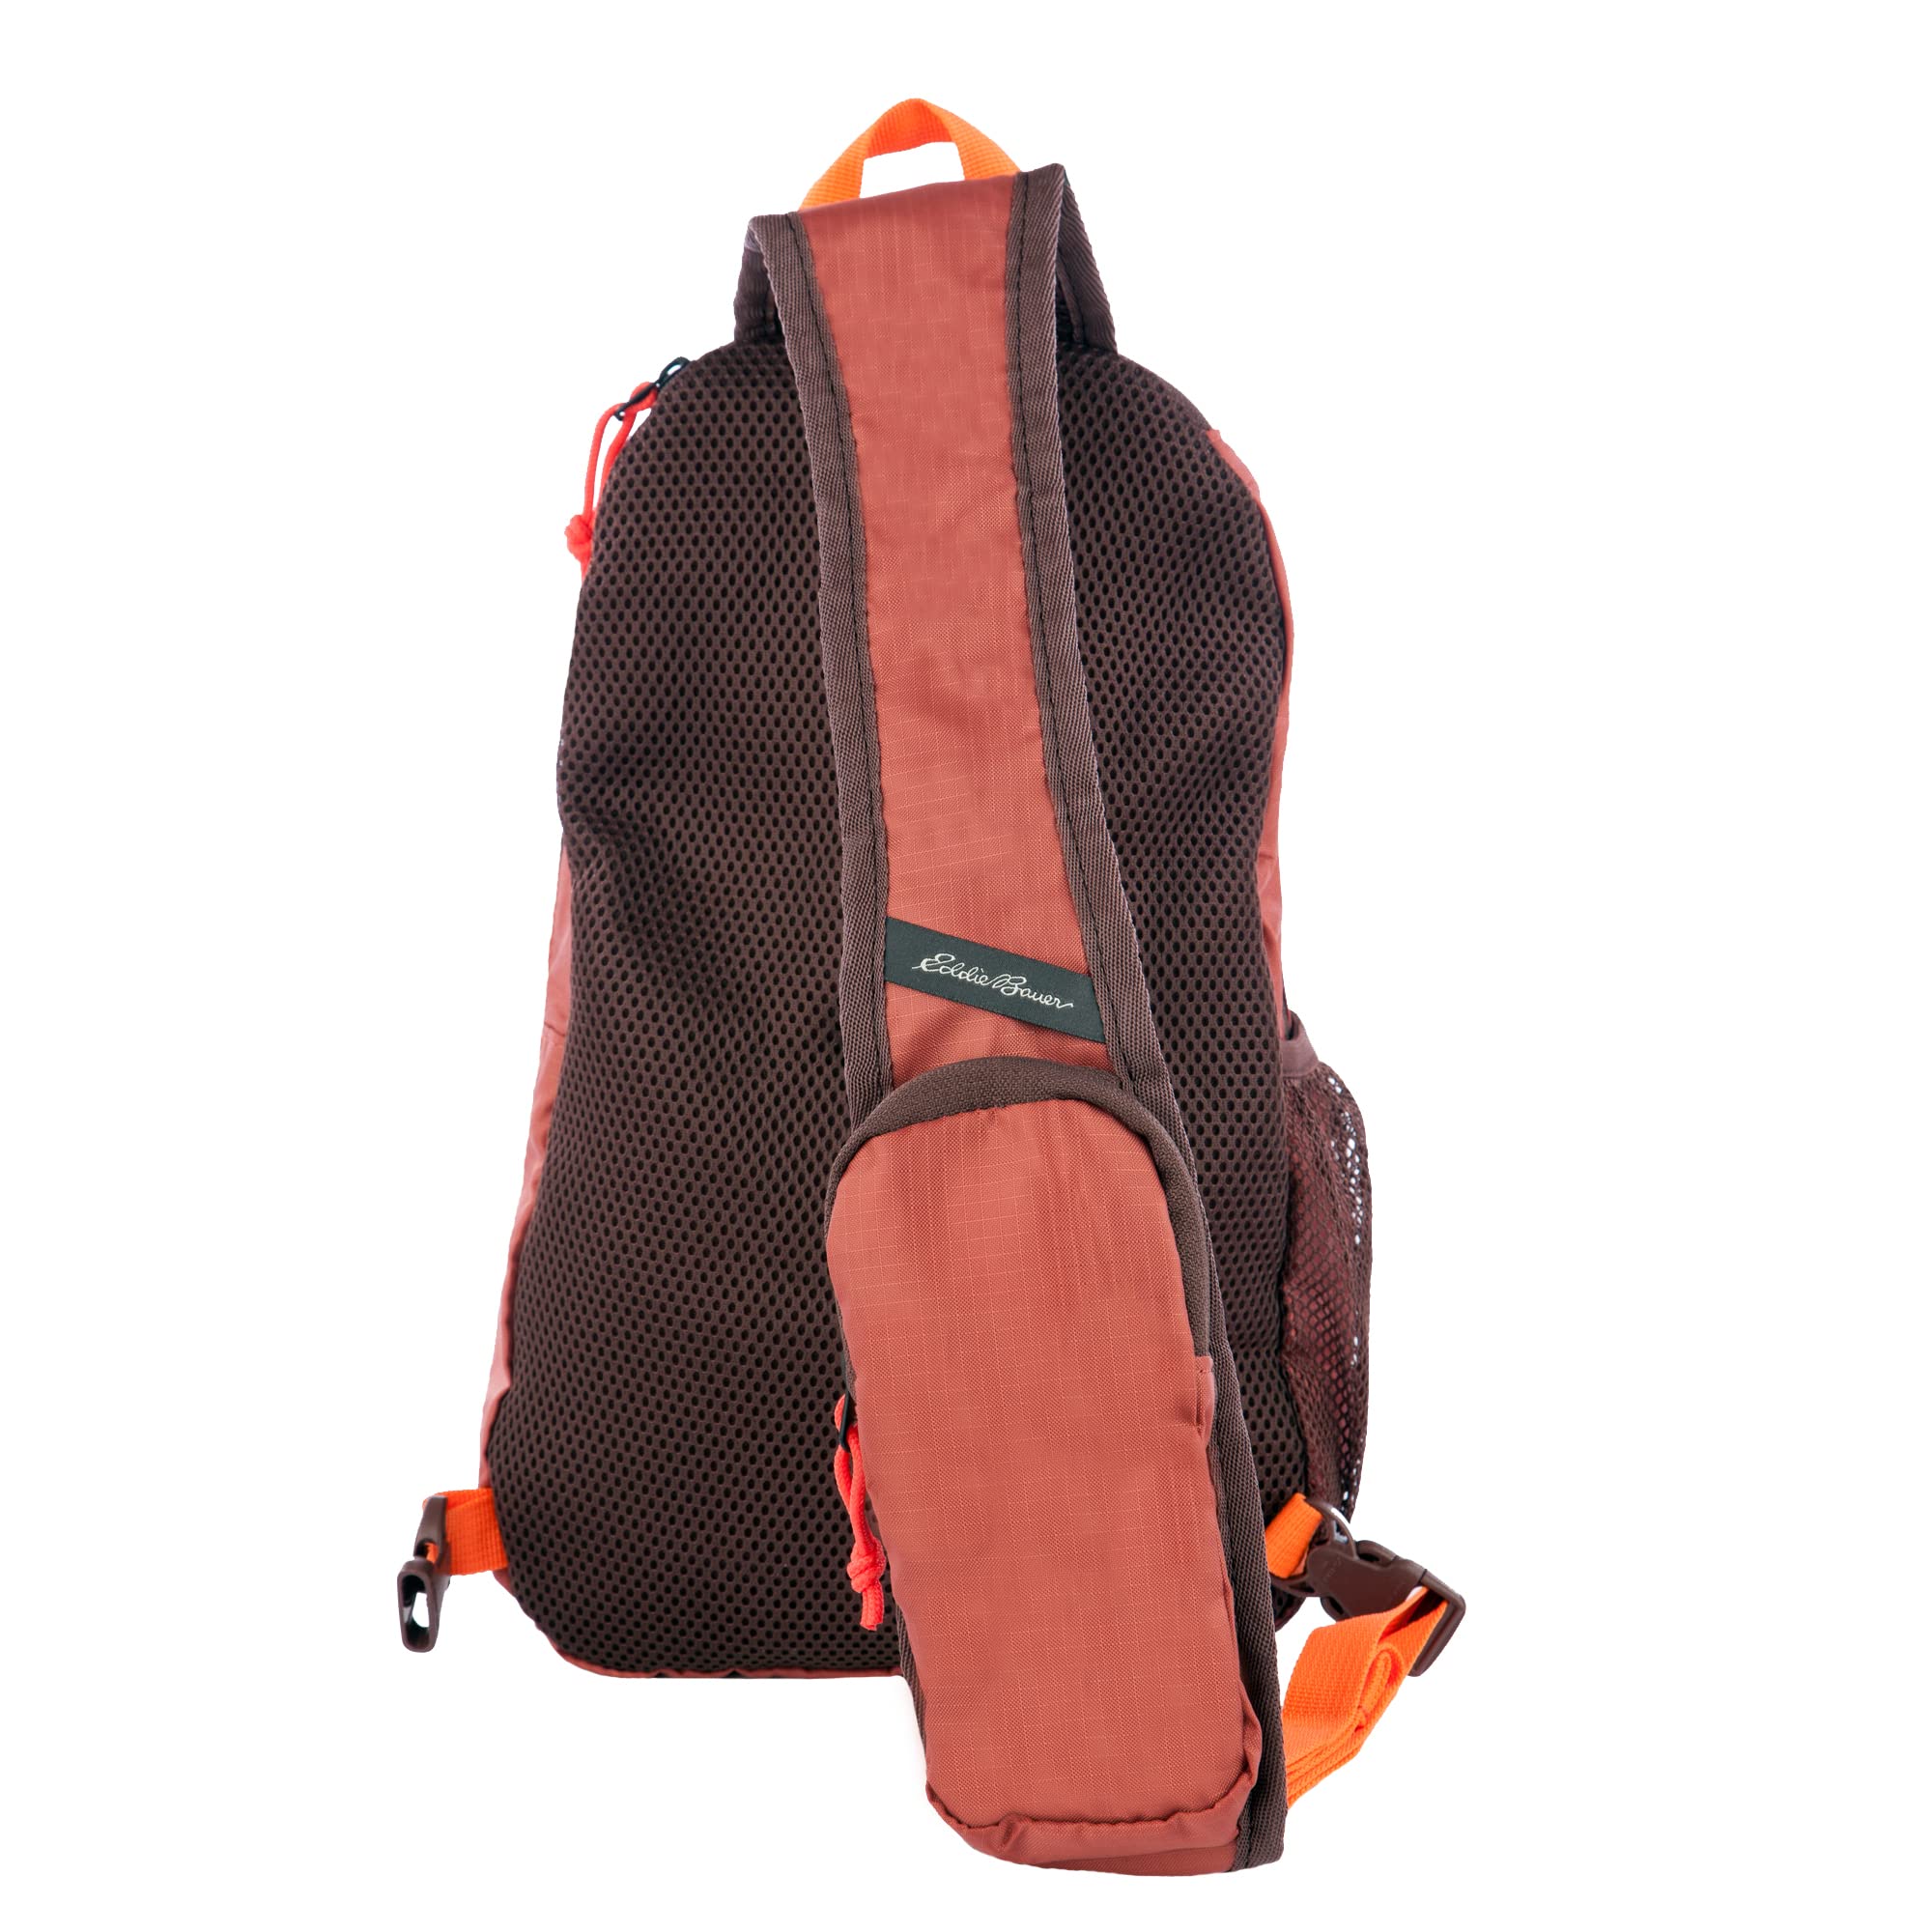 Eddie Bauer Stowaway Packable 10L Sling 3.0 Made from Polyester with Lightly Padded Shoulder Strap, Maroon